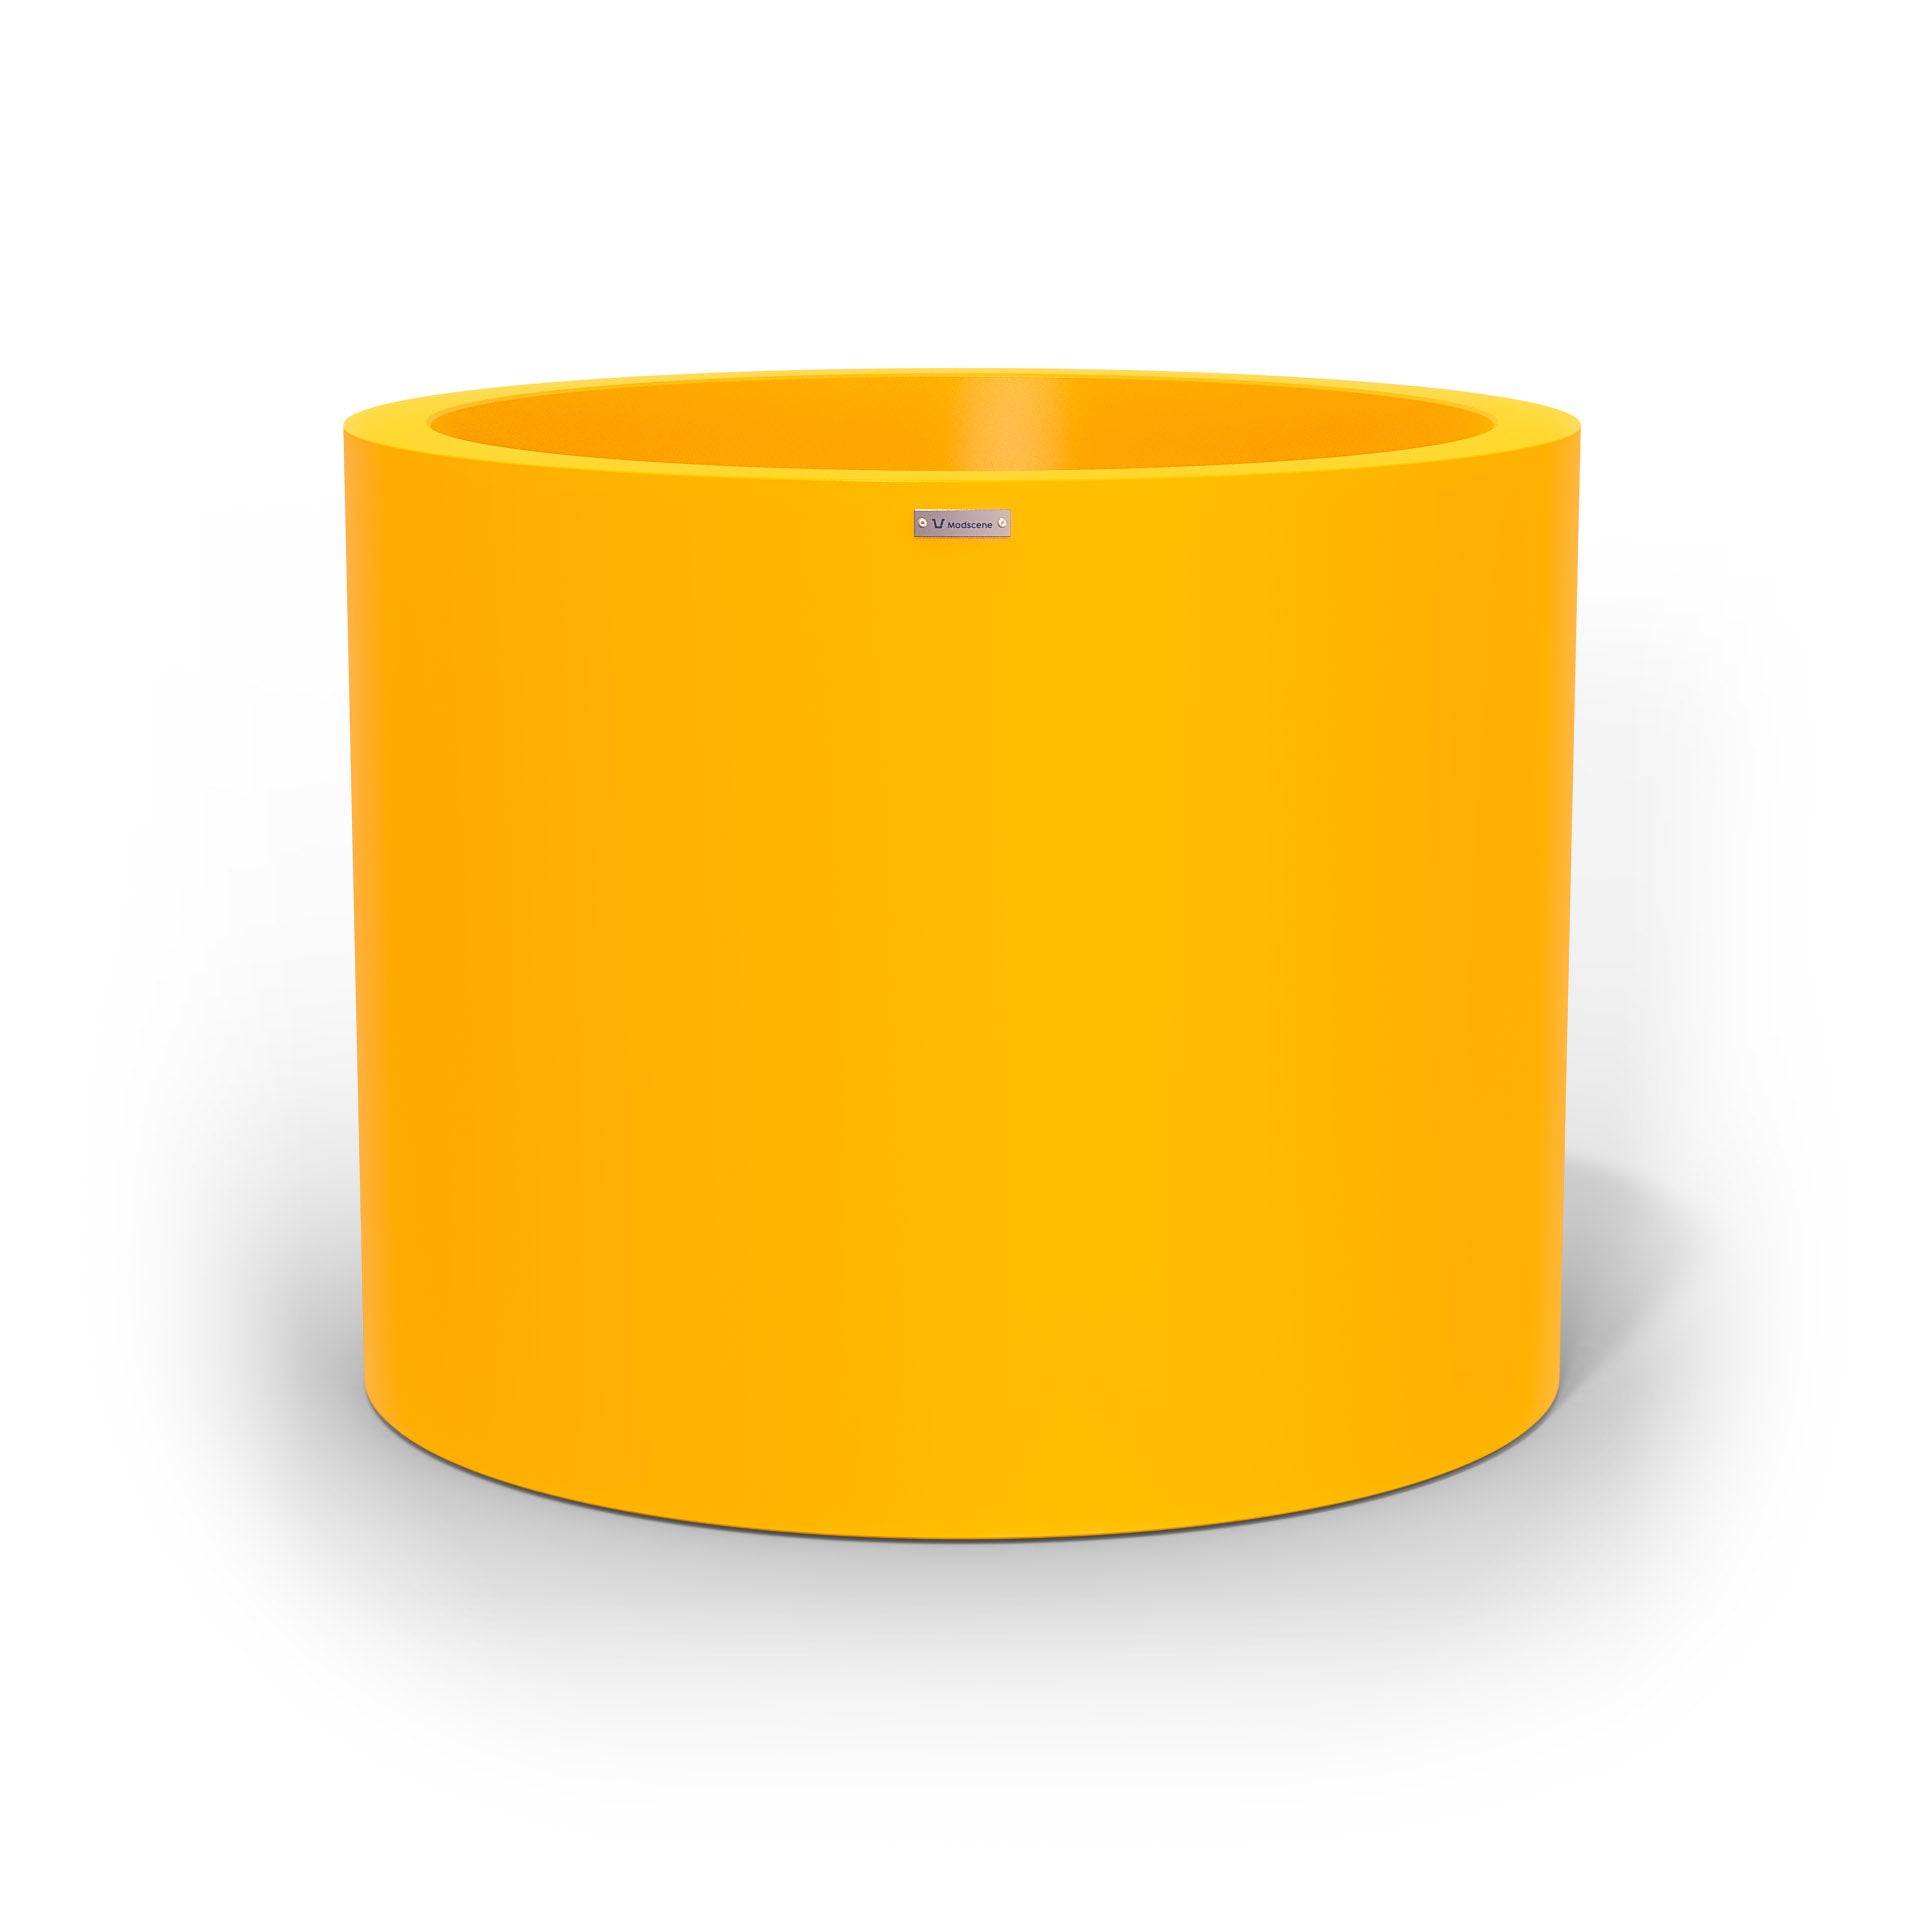 An extra large cylinder pot planter in yellow. Made by Modscene New Zealand.